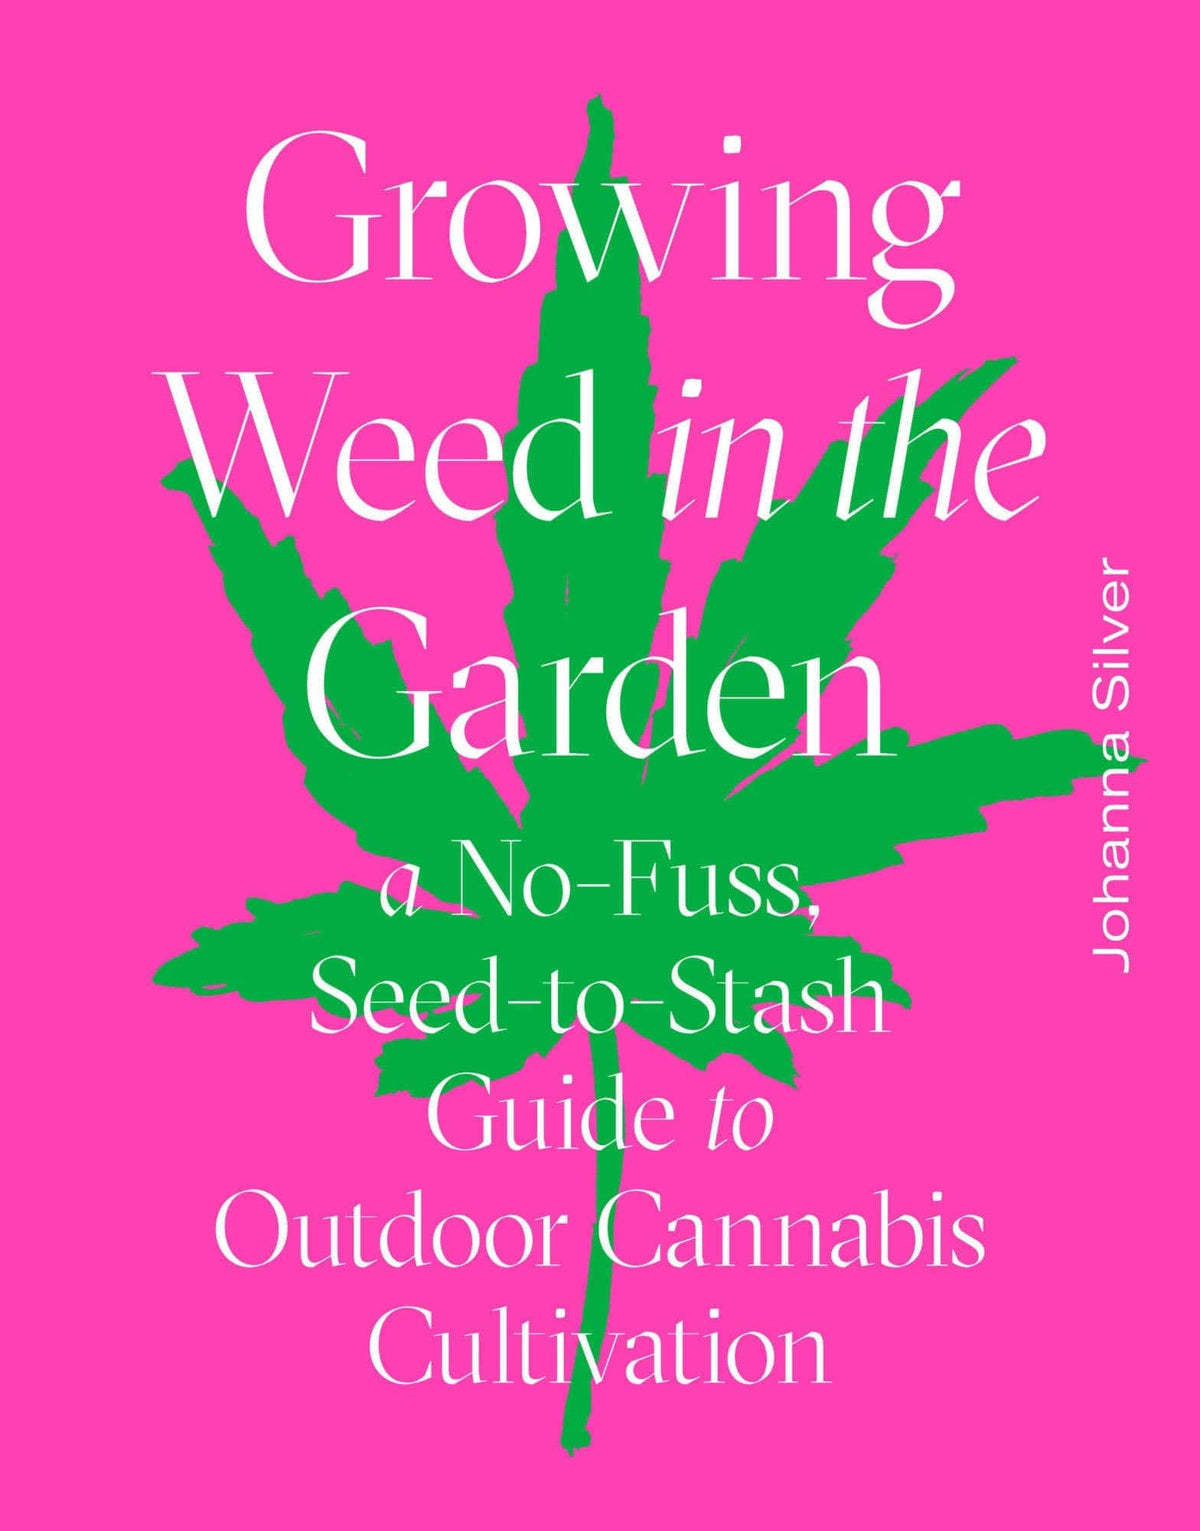 Growing Weed in the Garden: No-Fuss Seed-to-Stash Guide to Outdoor Cannabis HC - Third Eye